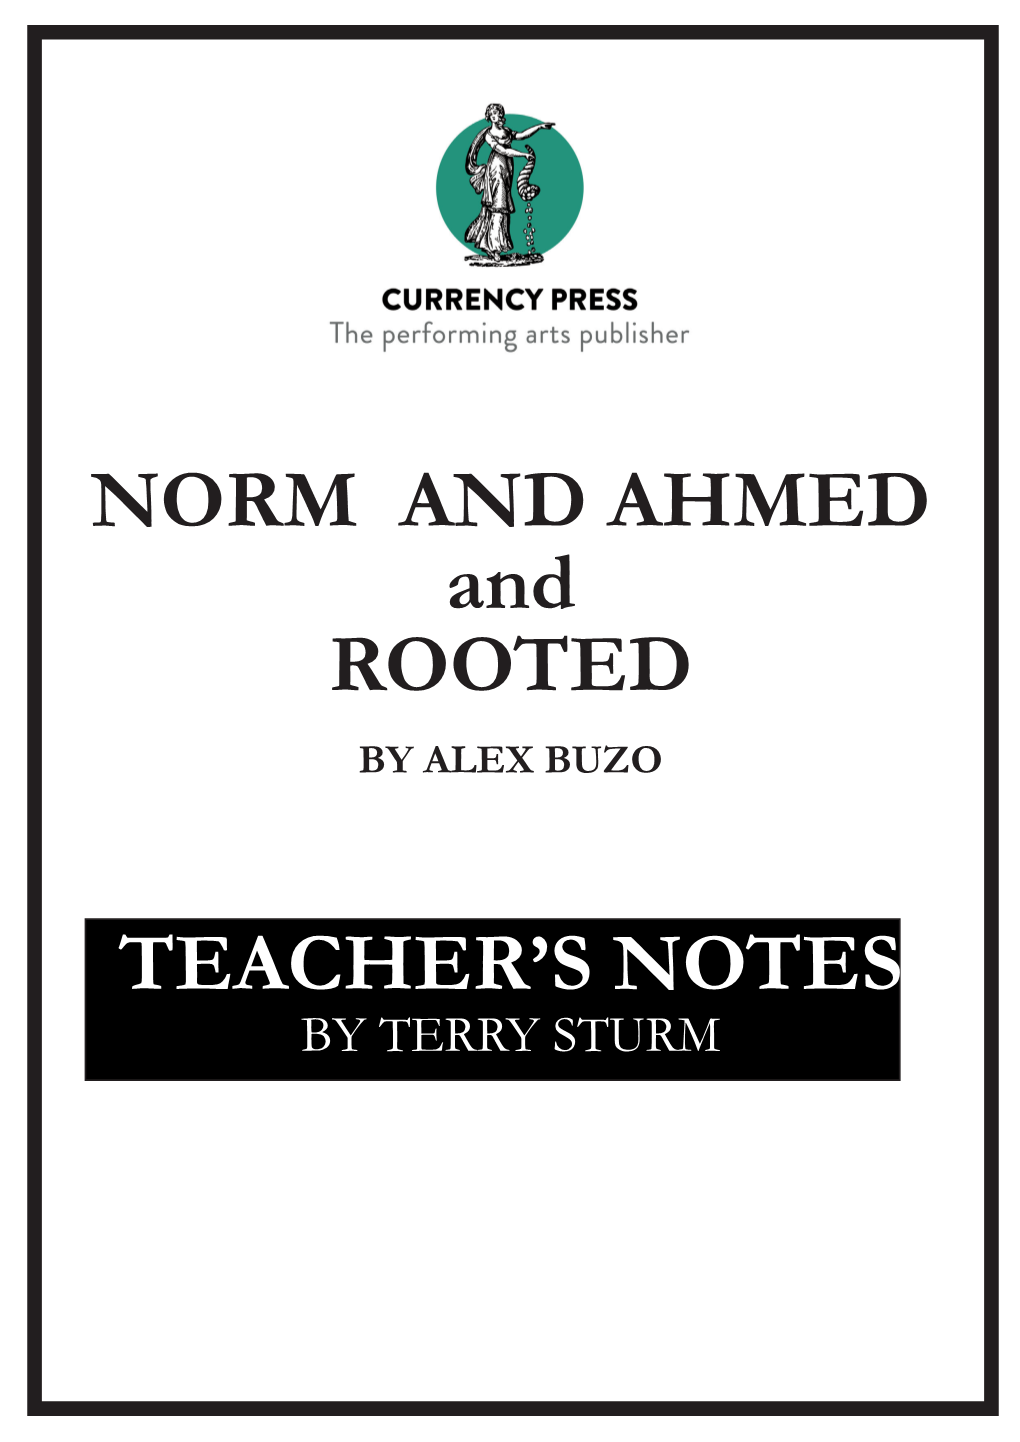 NORM and AHMED and ROOTED TEACHER's NOTES